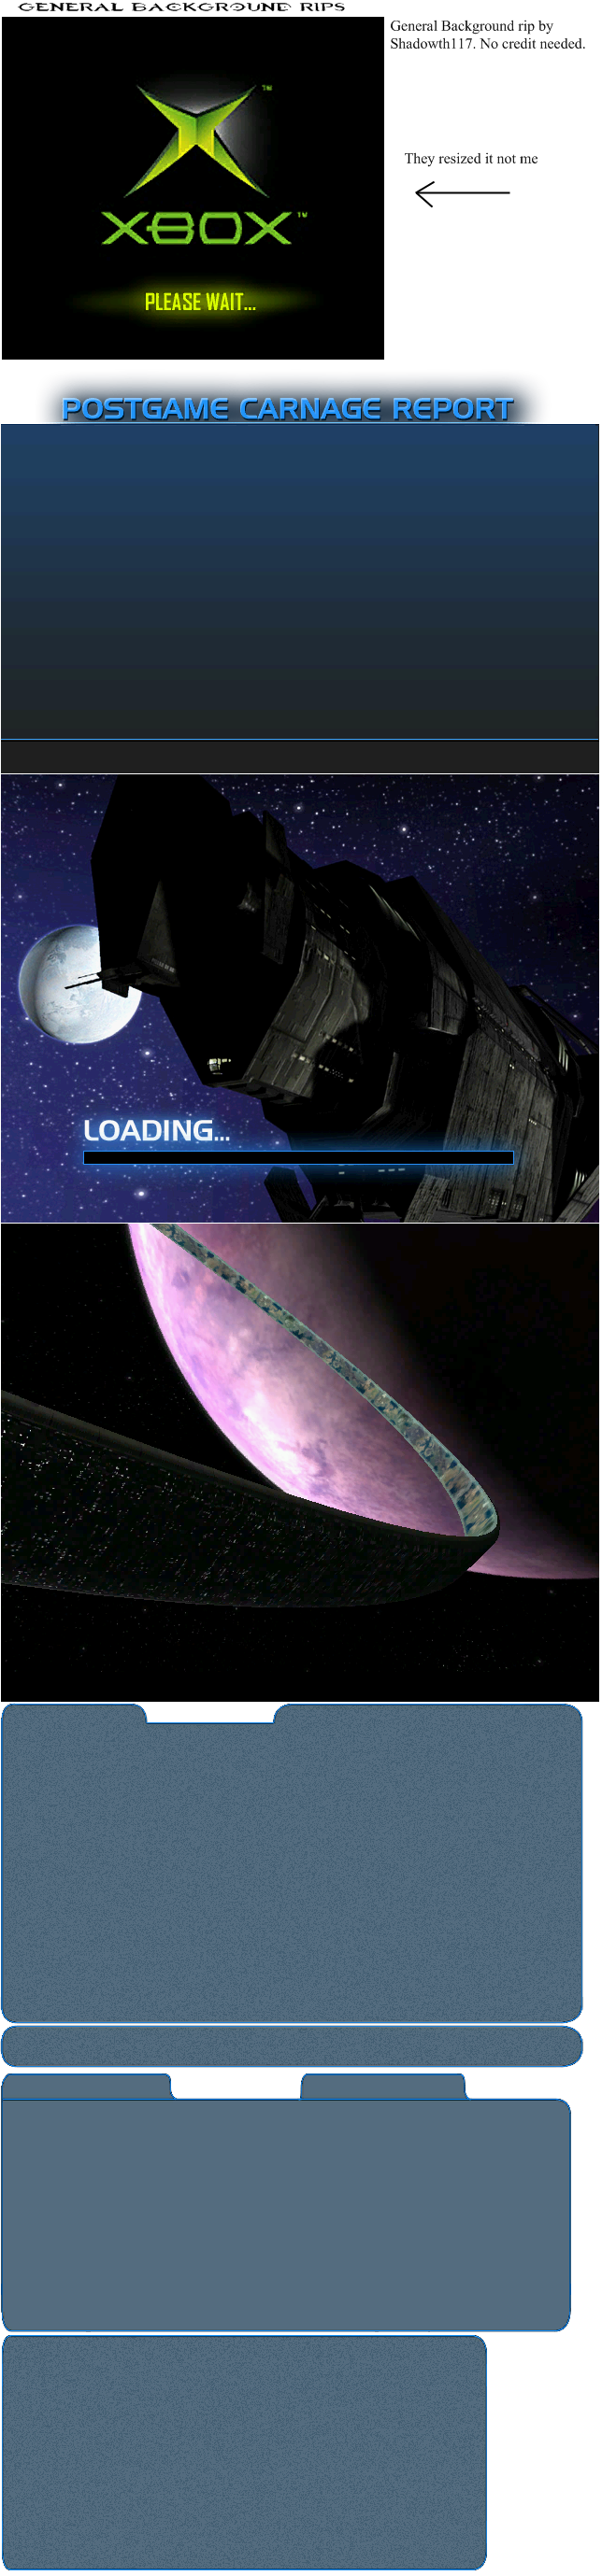 Halo - Combat Evolved - General Background Rip